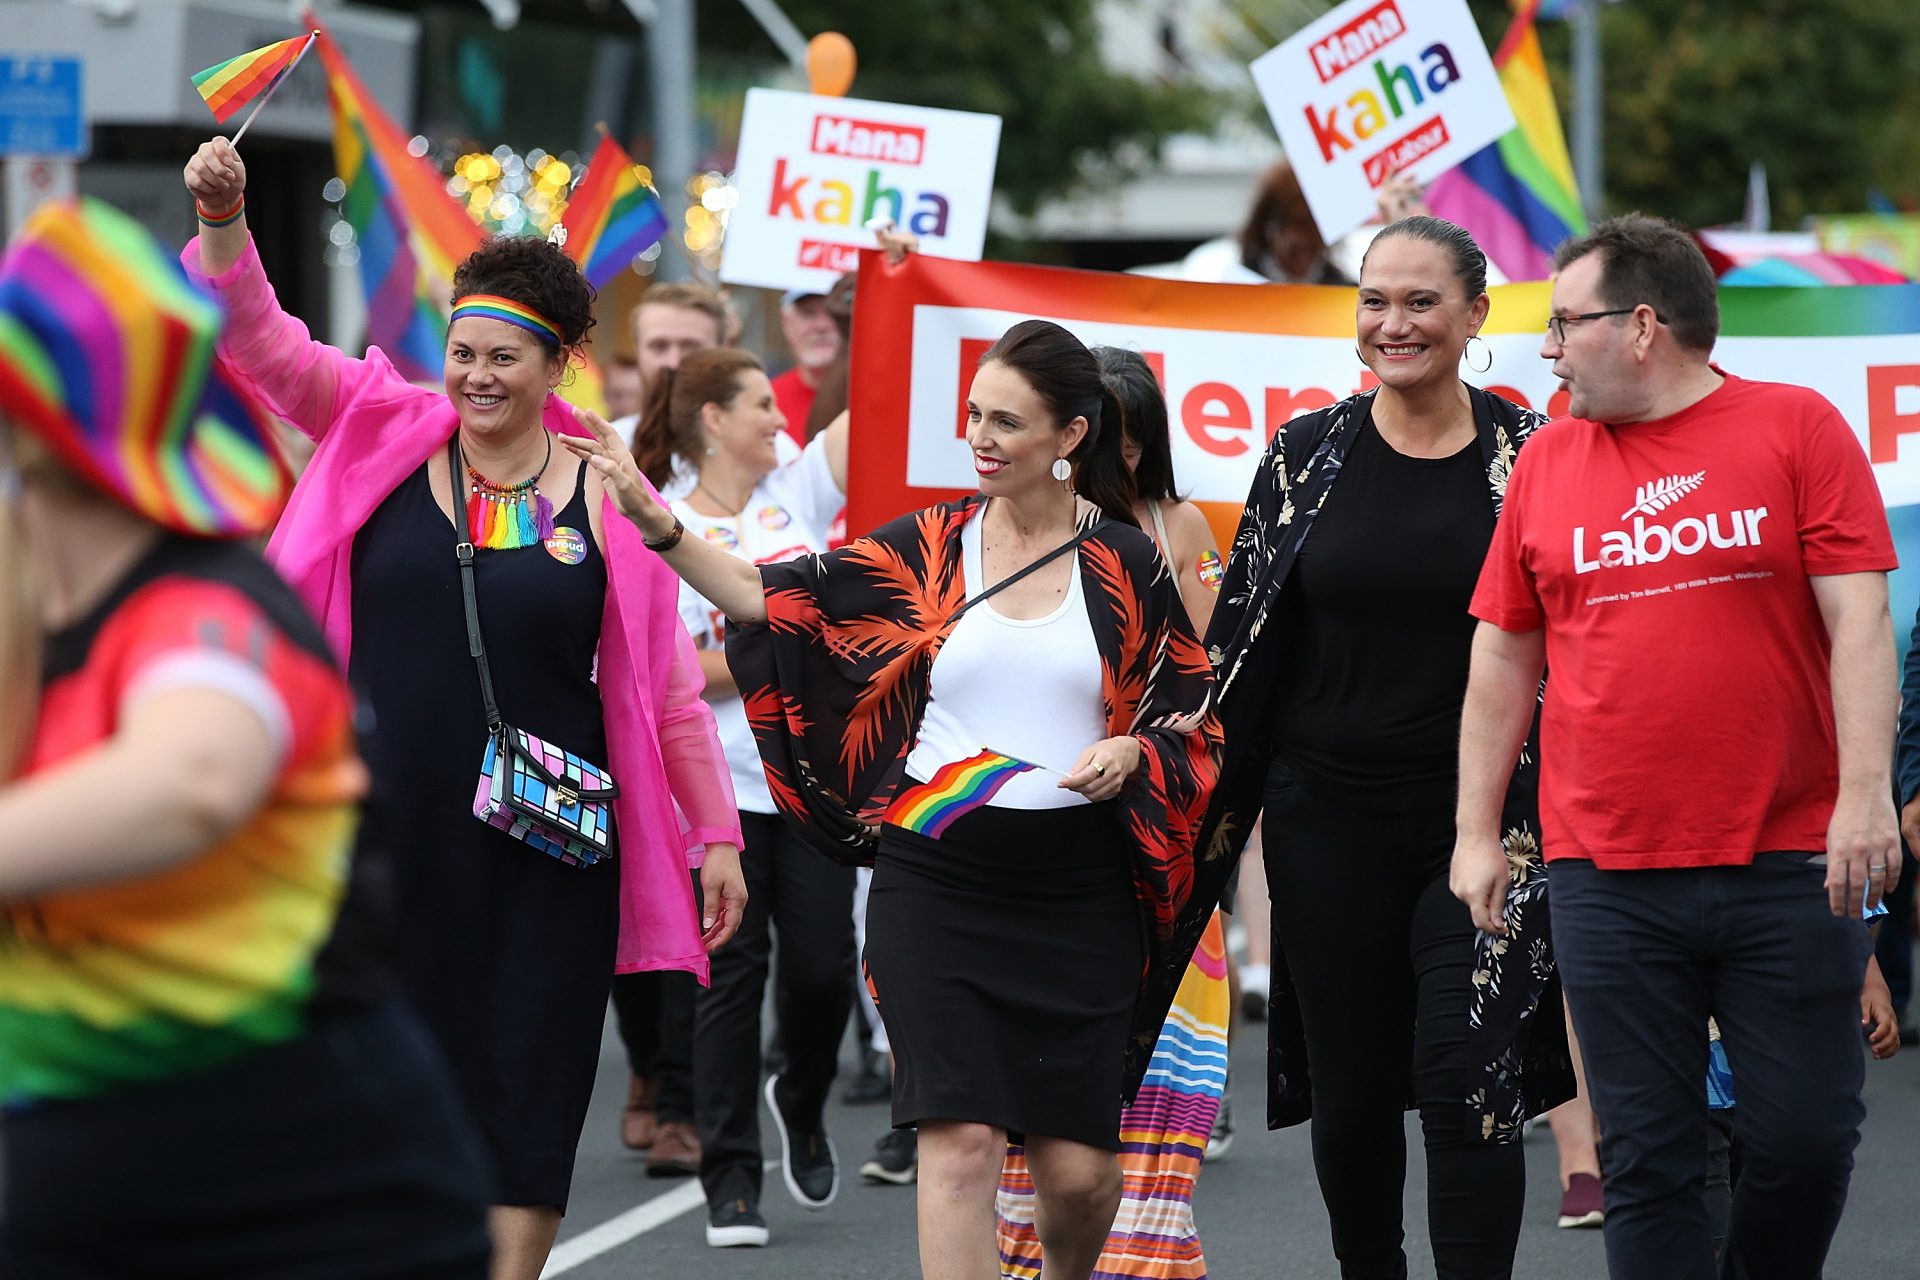 <p>New Zealand is another place with the most advanced LGBTQ rights. Same-sex marriage and adoption by same-sex couples is legal there, for example. In the picture, we see former Prime Minister Jacinda Ardern as the first New Zealand PM to walk in the Pride Parade in February 2018.</p>